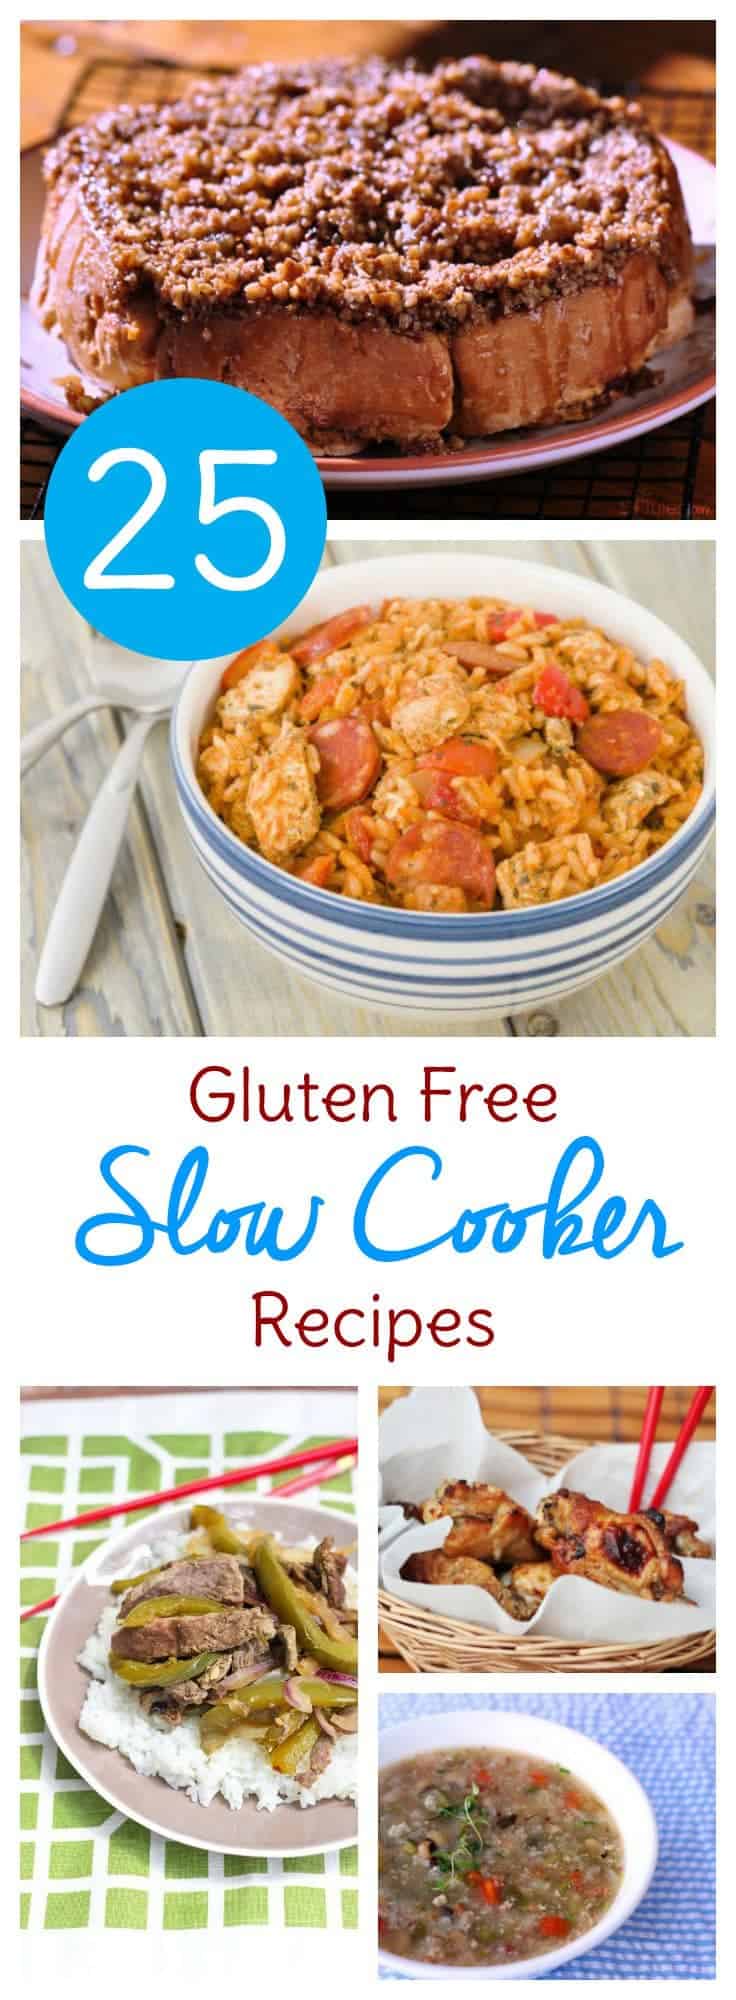 These Gluten free Crockpot meals are a lifesaver for busy days. Click over for 25 easy gluten free Crock Pot recipes to try this week!